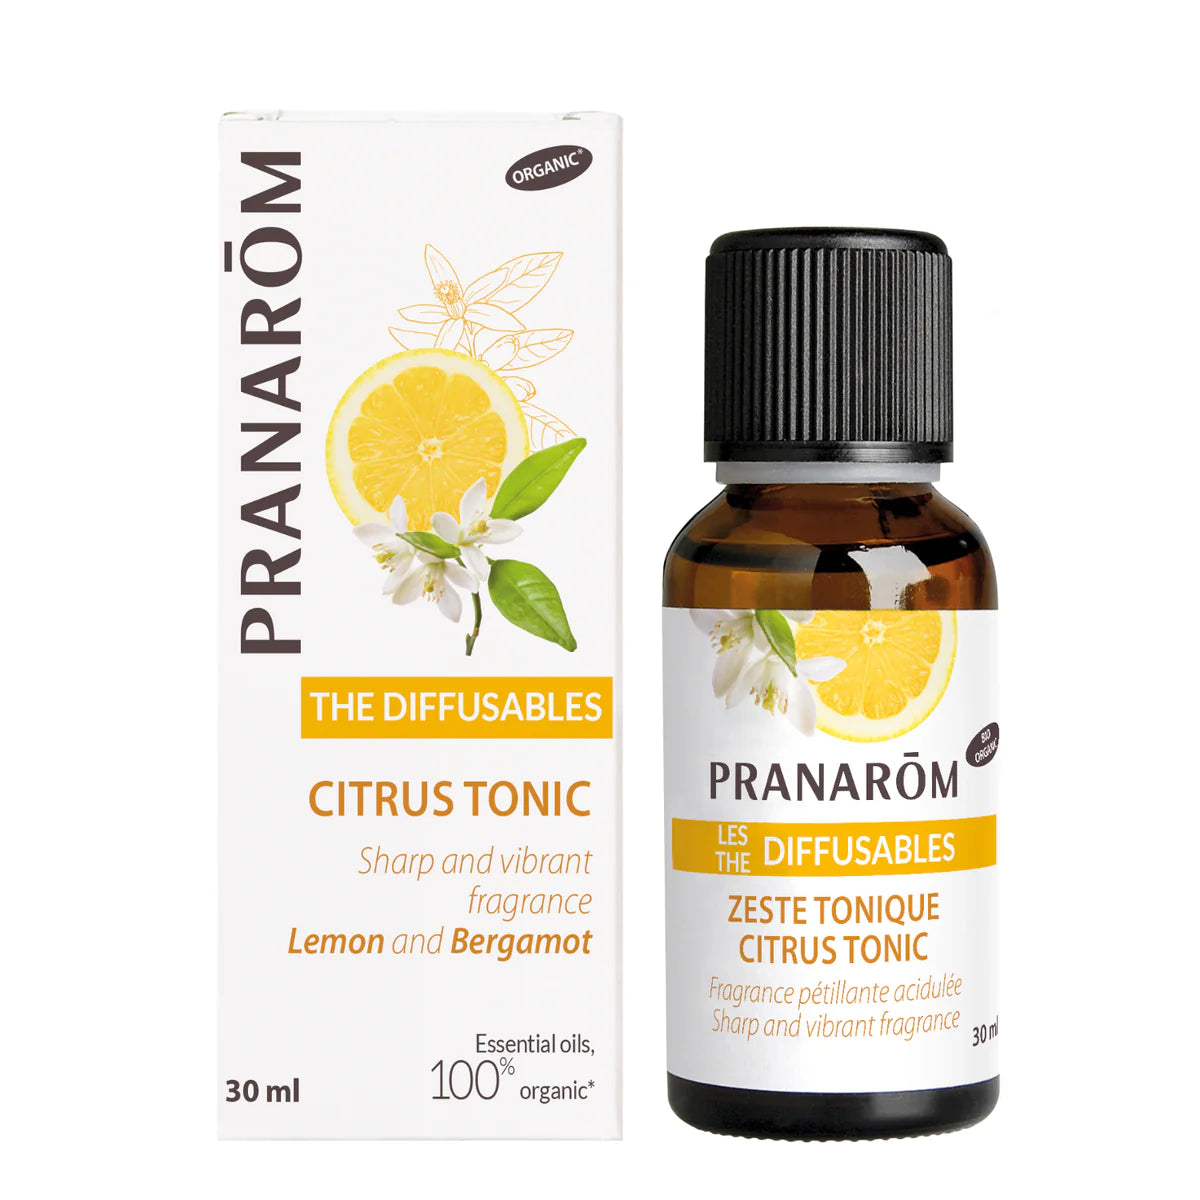 Citrus Tonic This blend contains 100% pure and natural chemotyped essential oils, 30ml